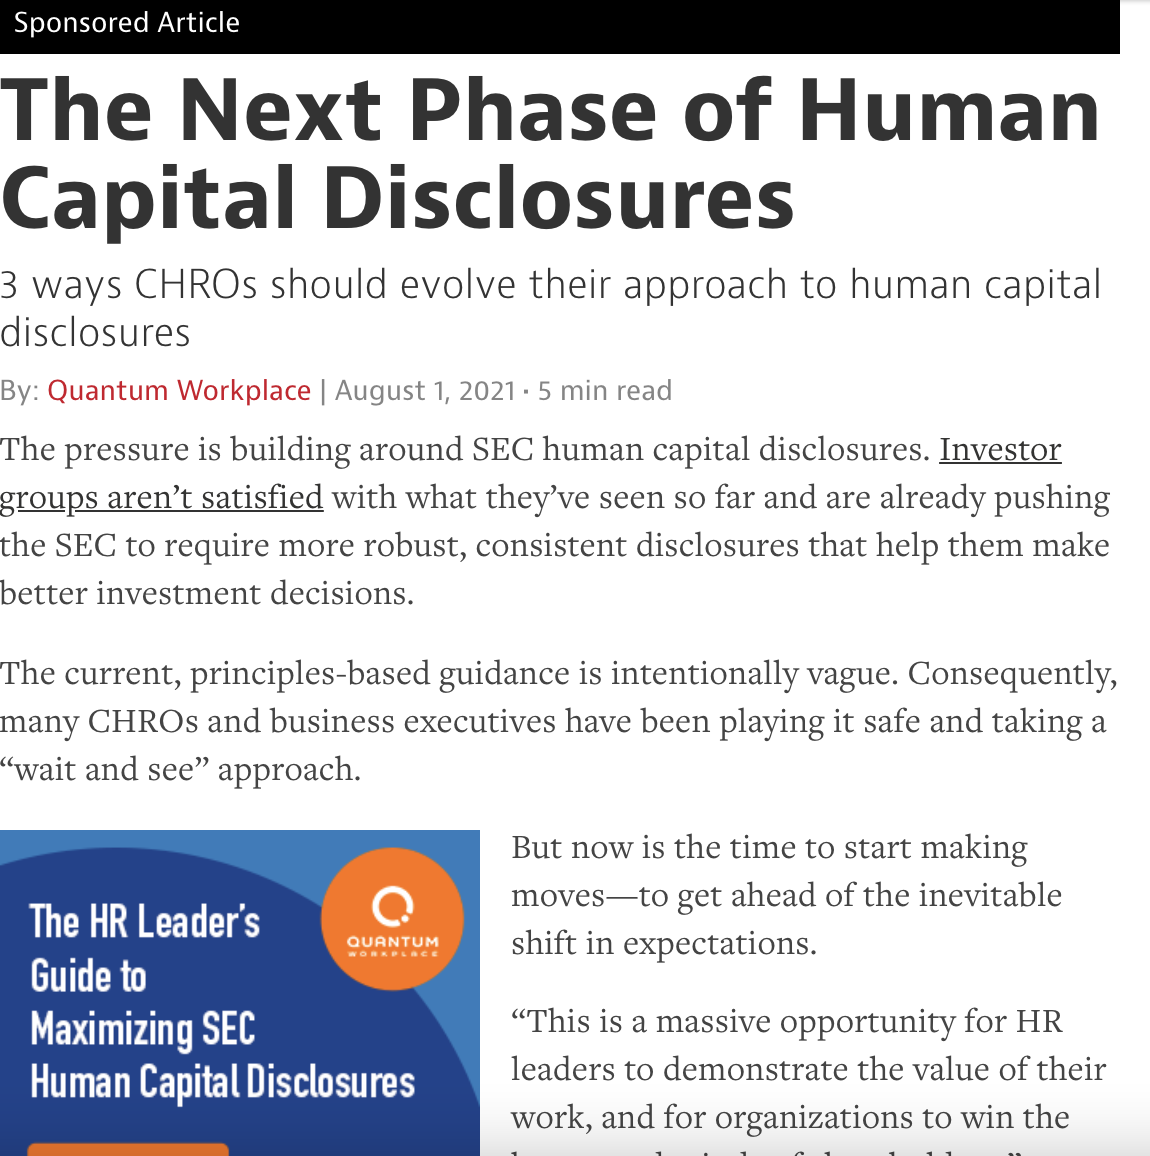 The Next Phase of Human Capital Disclosures